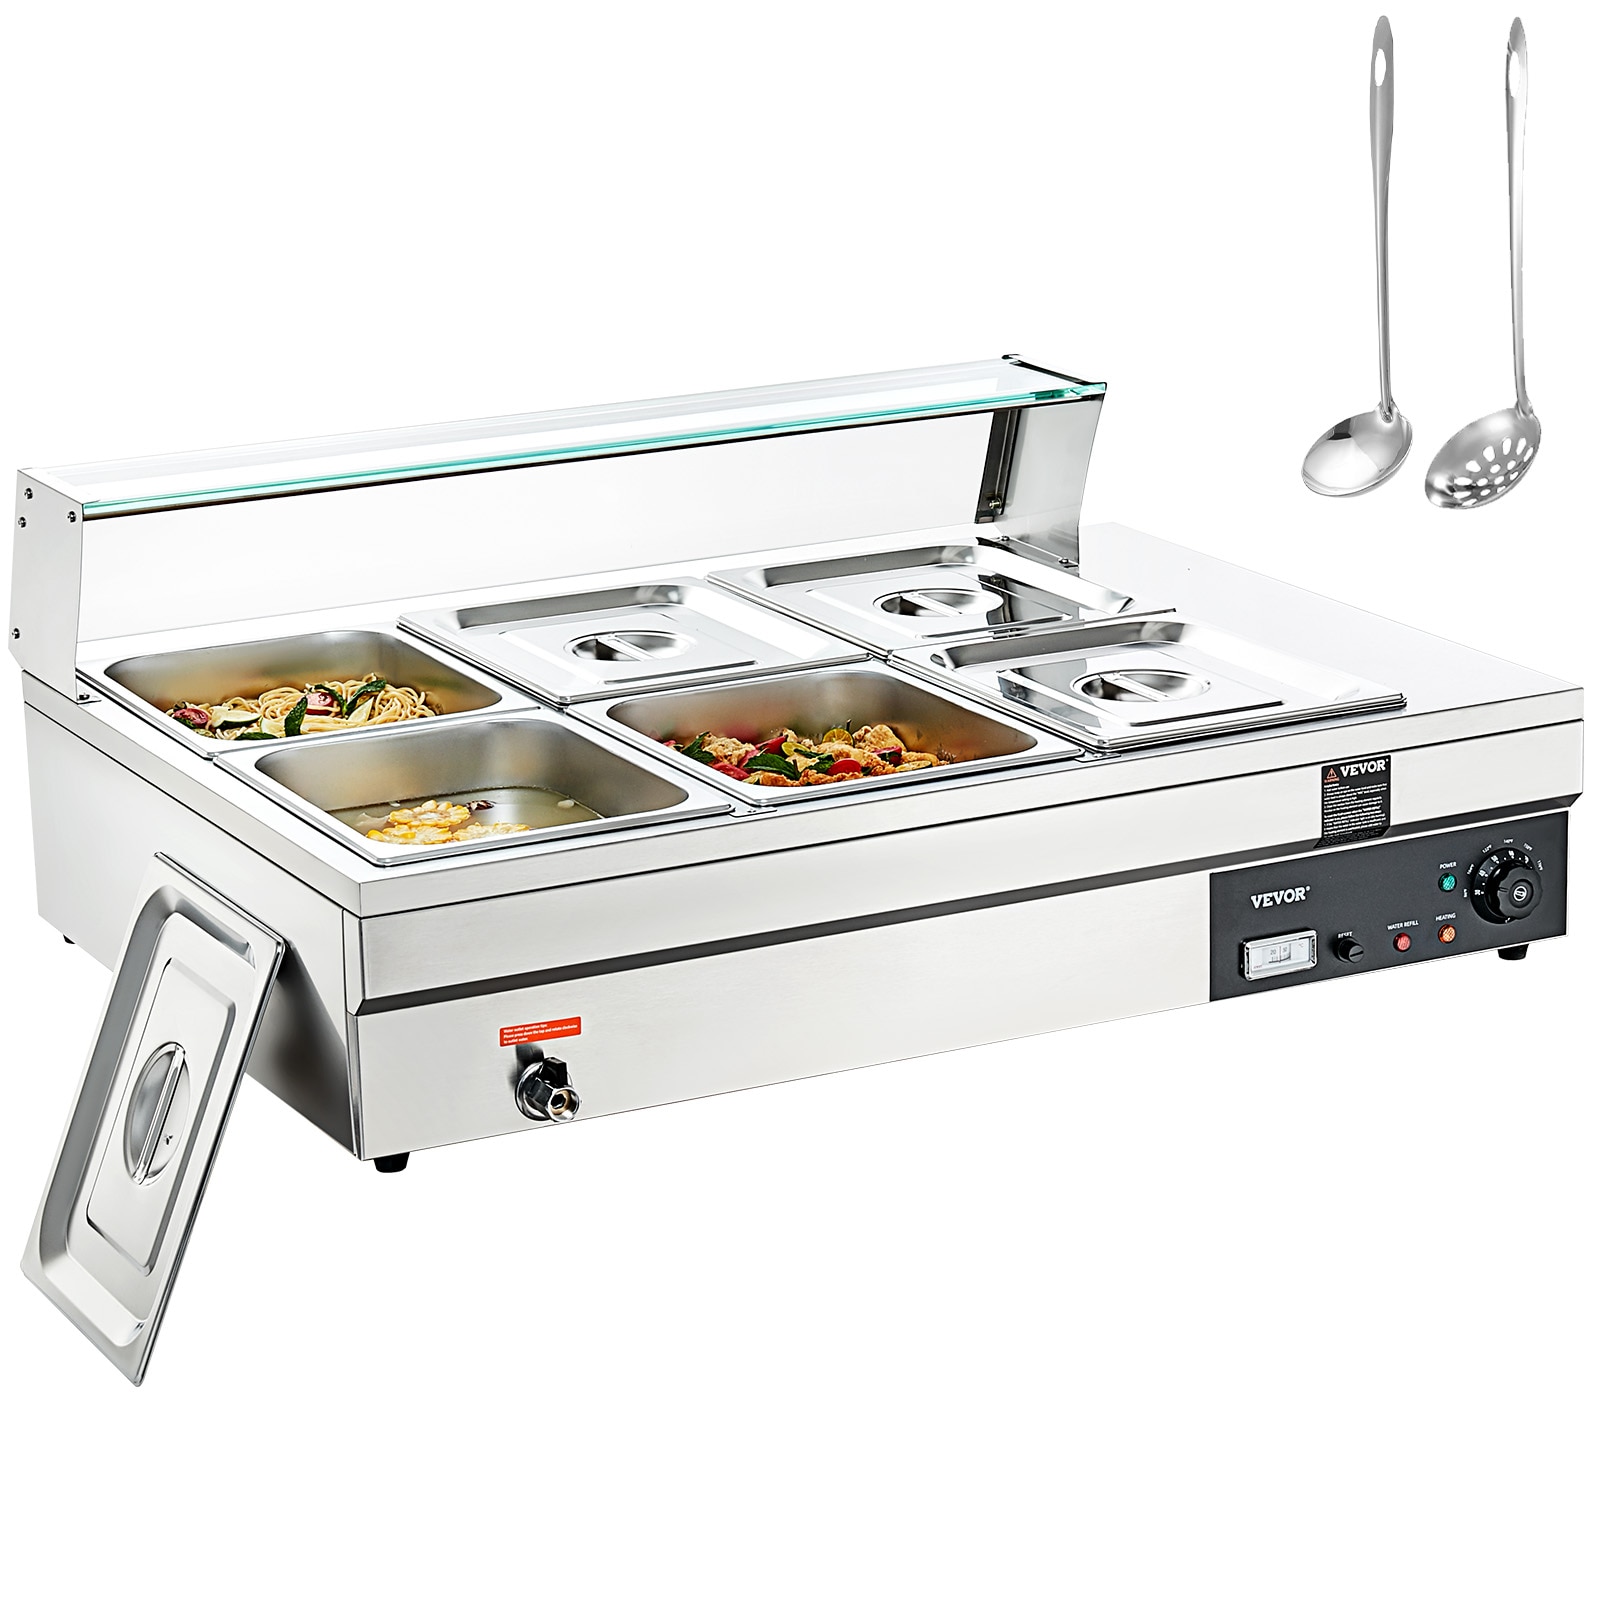 VEVOR Electric Buffet Server and Food Warmer, 25.6 in. x 15 in. Portable Stainless Steel Chafing Dish Set with Temp Control, Silver